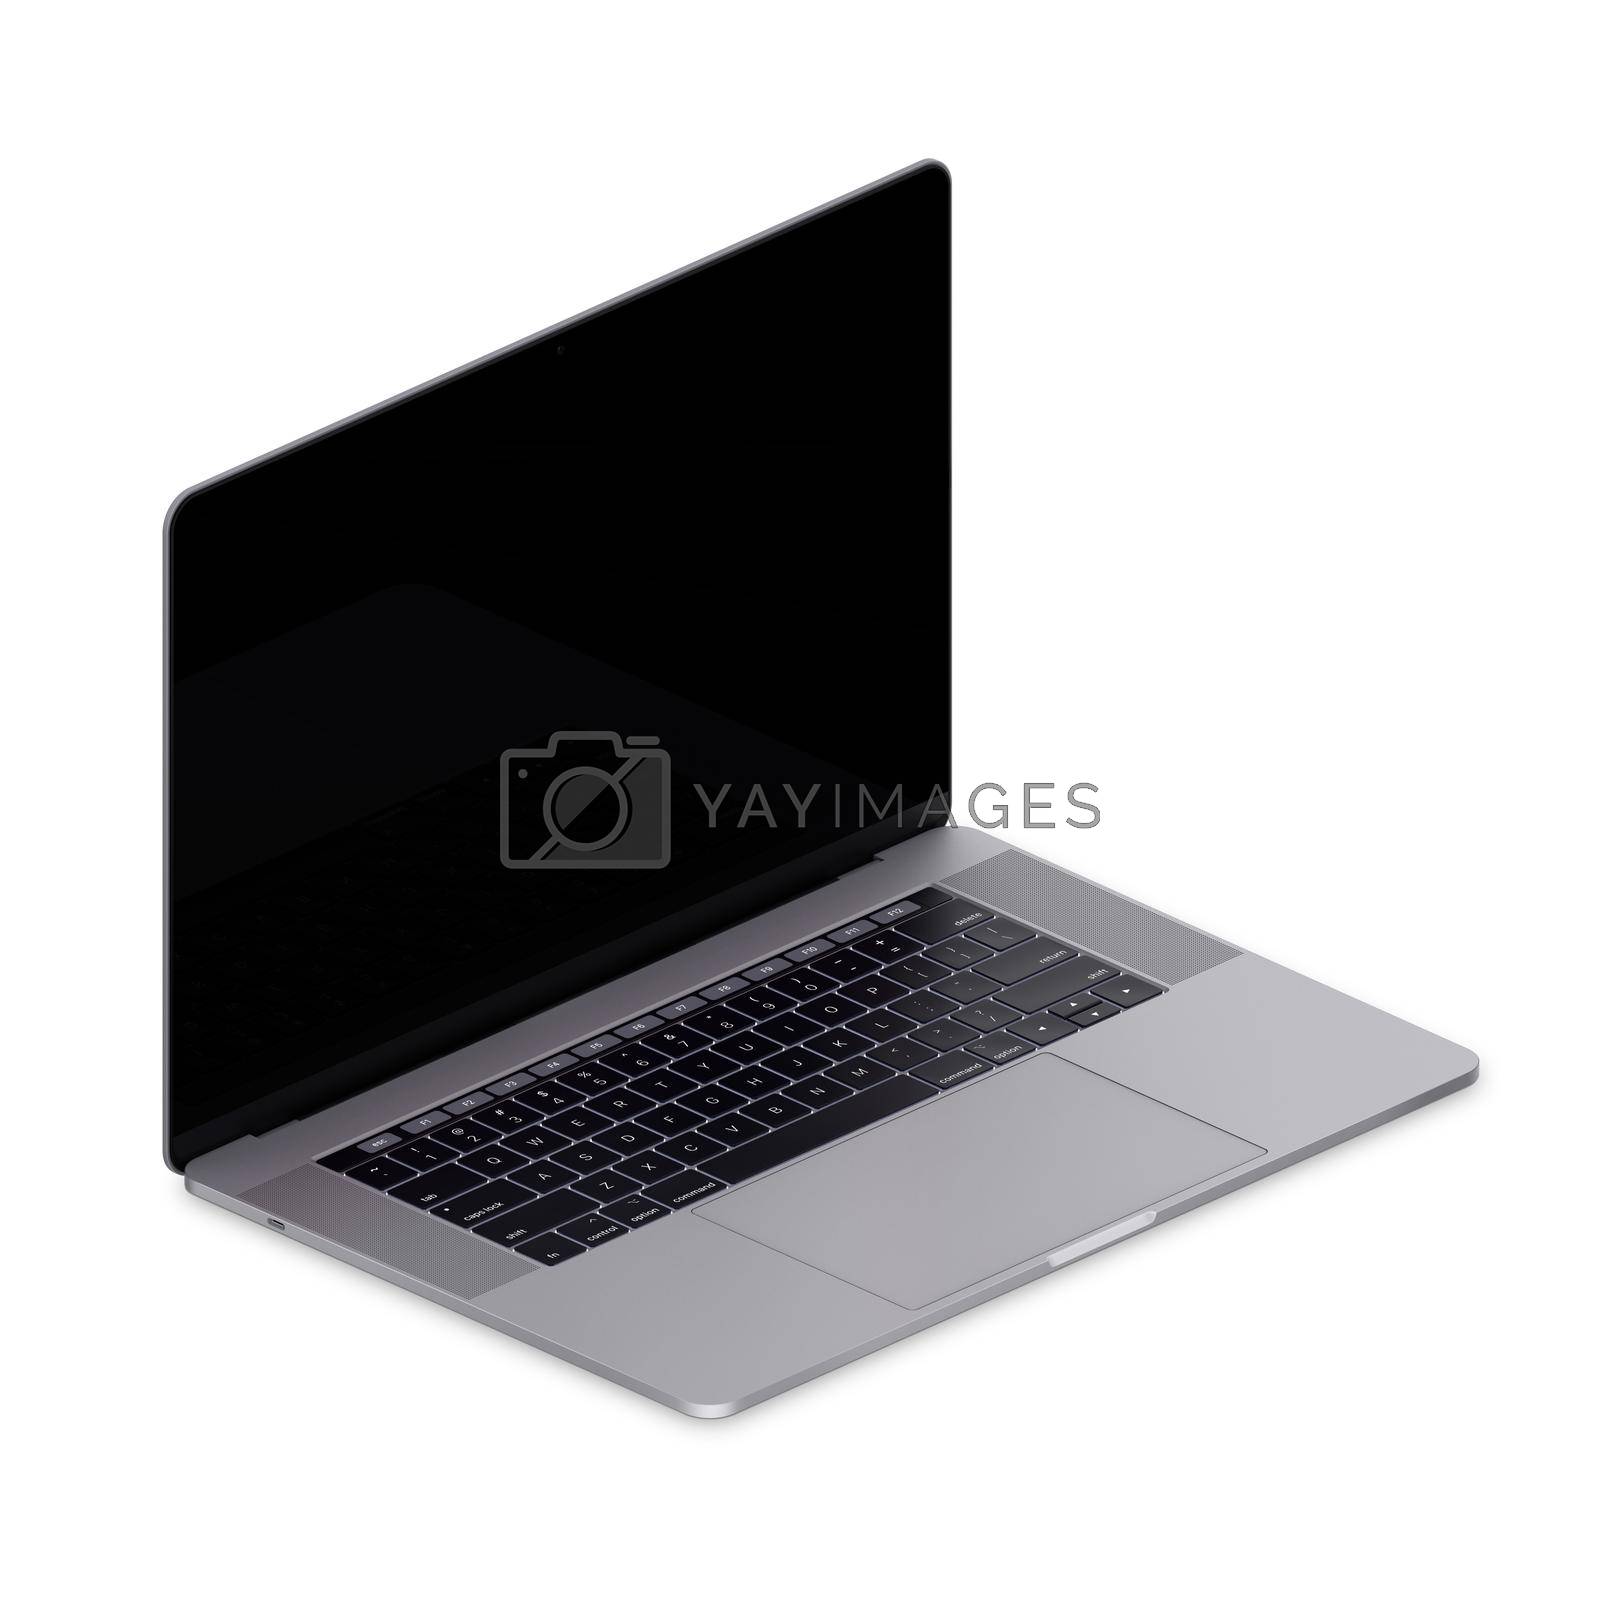 Royalty free image of Laptop isolated on a white background of gray color by Mastak80